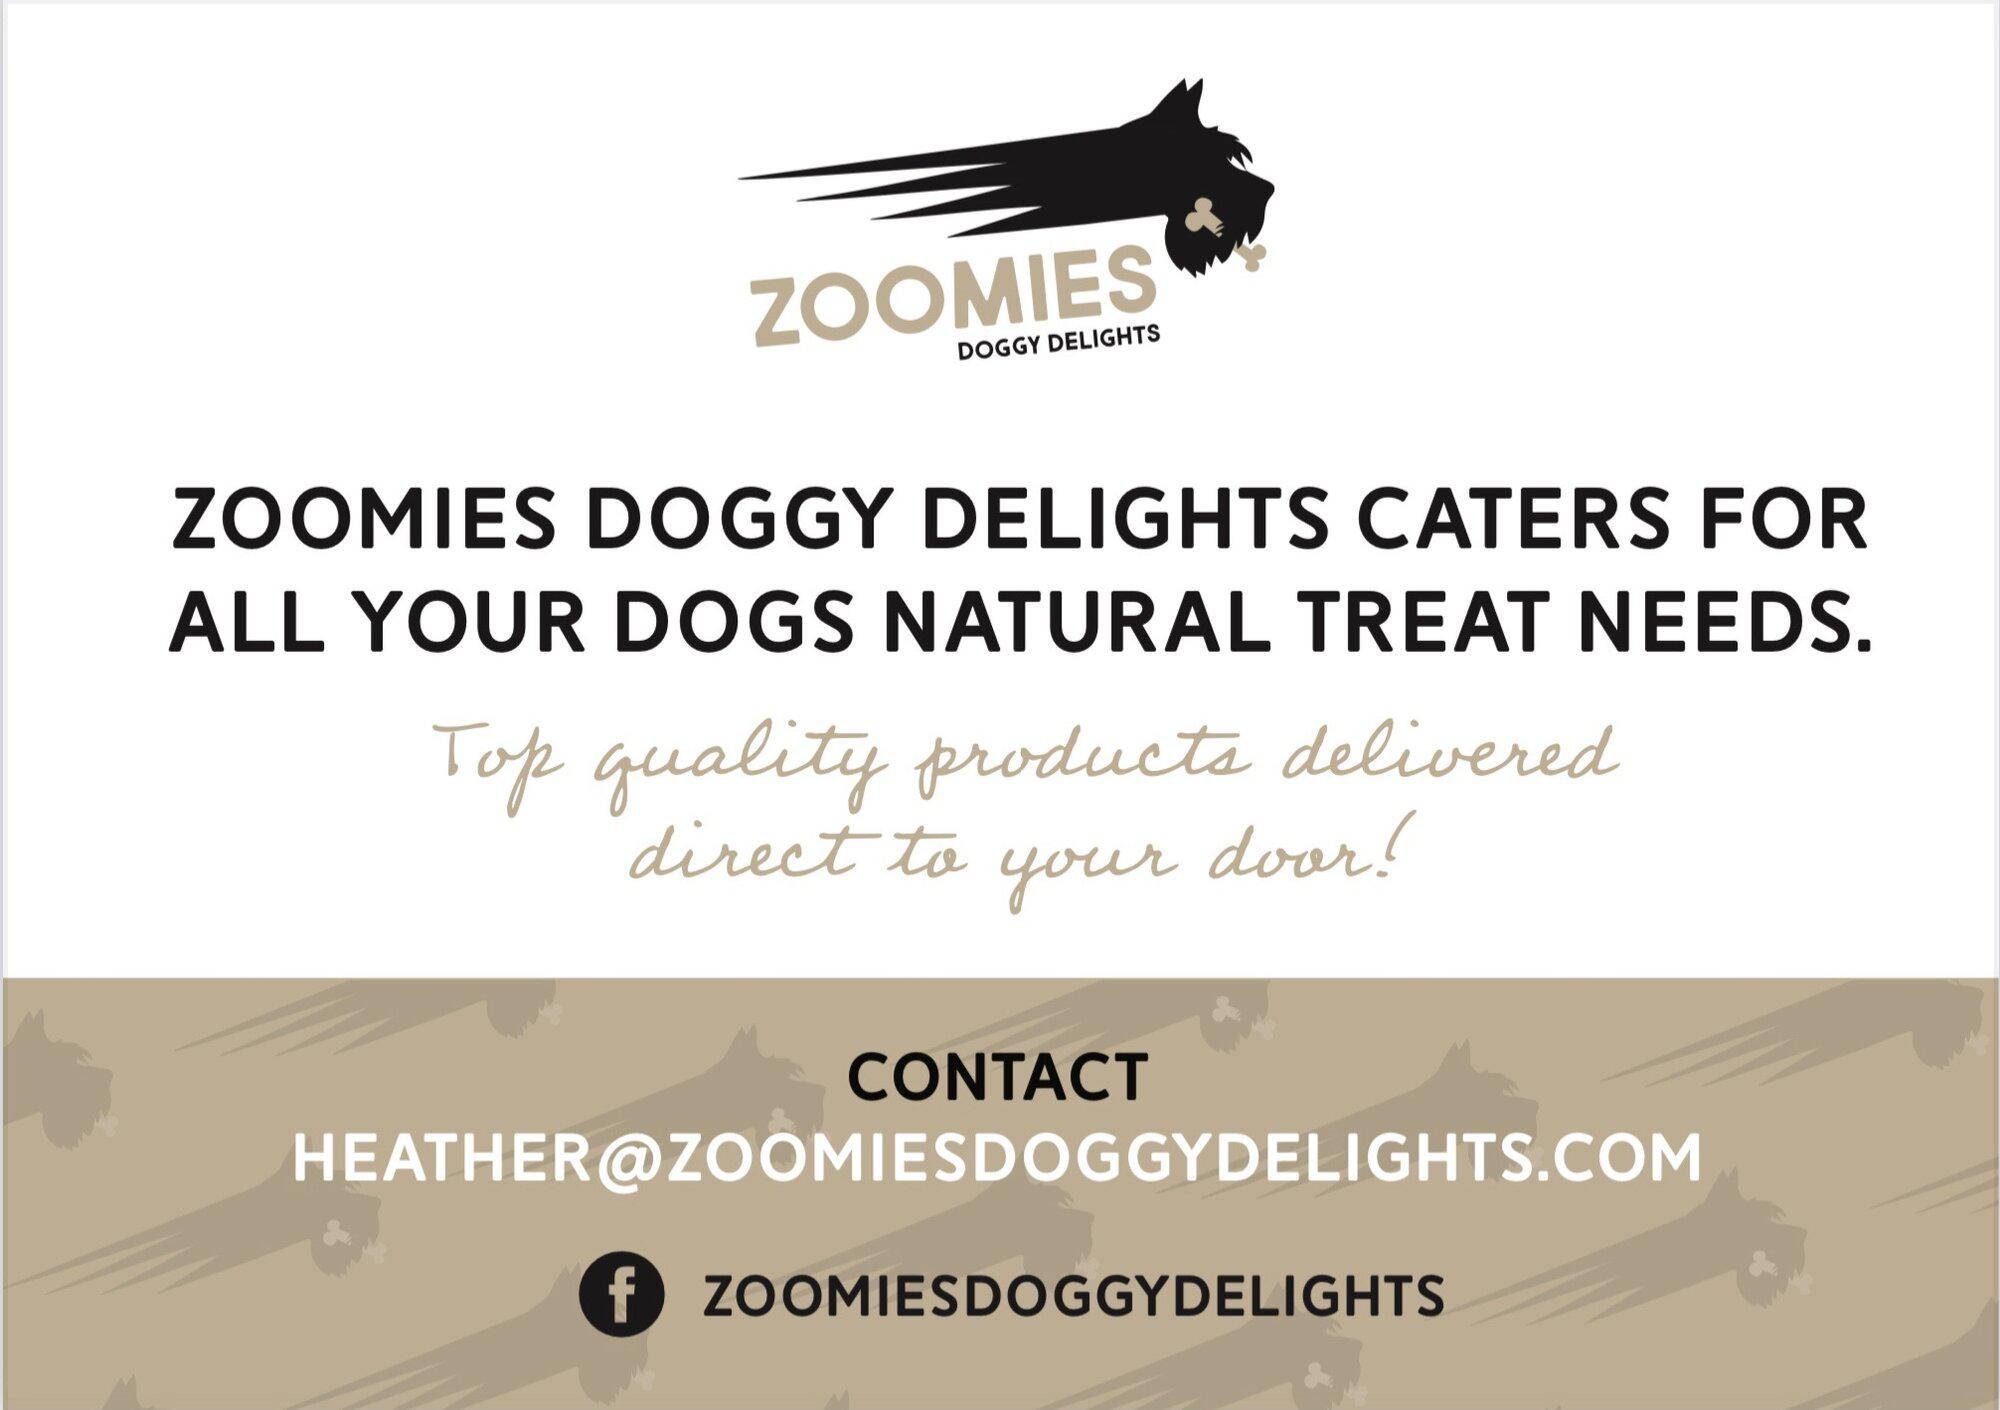 Zoomies Doggy Delights Newmilns 07799 717470